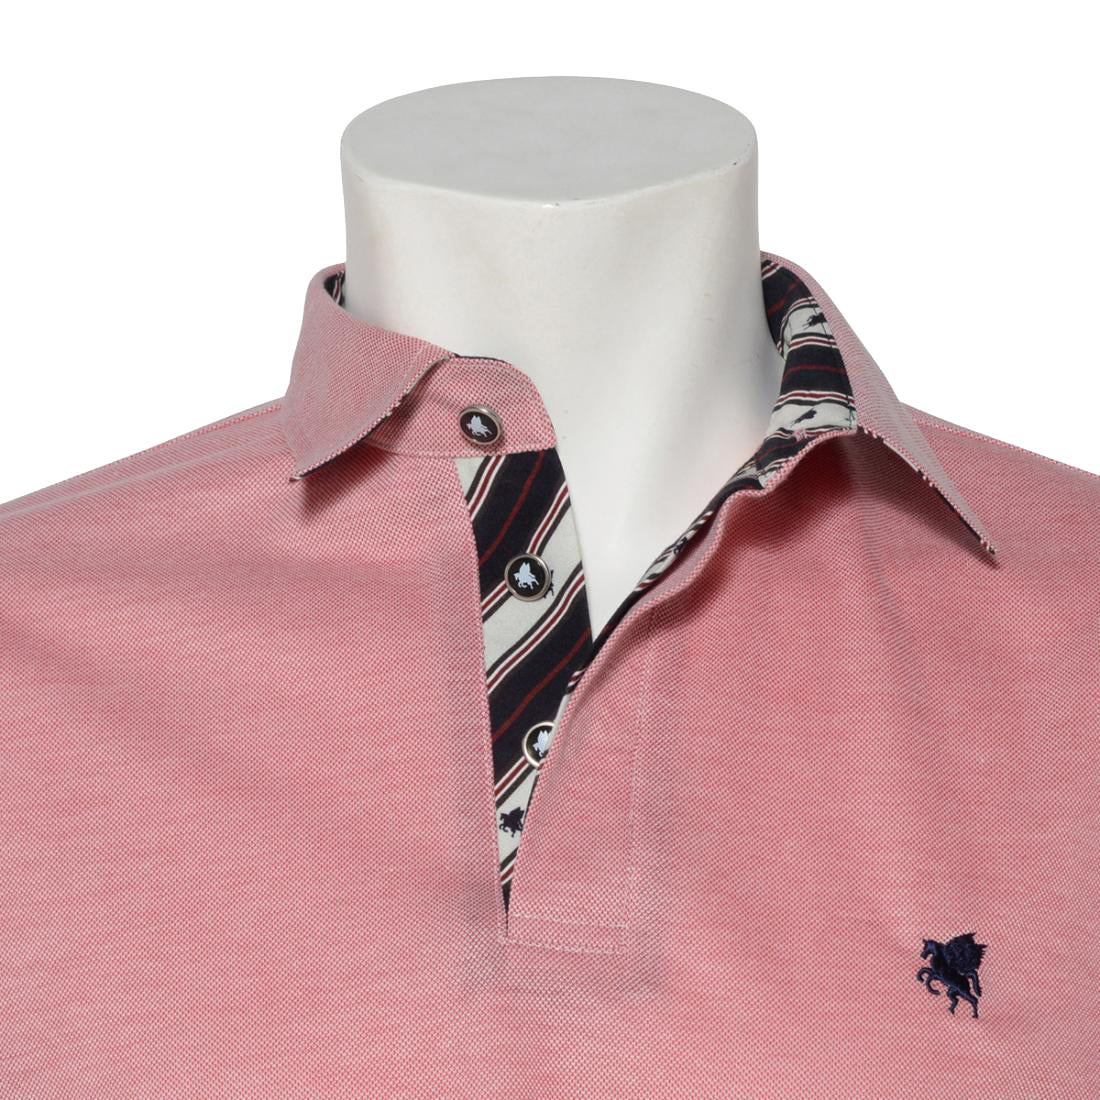 Men’s Short Sleeve Sports Polo Shirt -13. Miracle Pegasus Design Quick Dry Made in Japan FORTUNA Tokyo